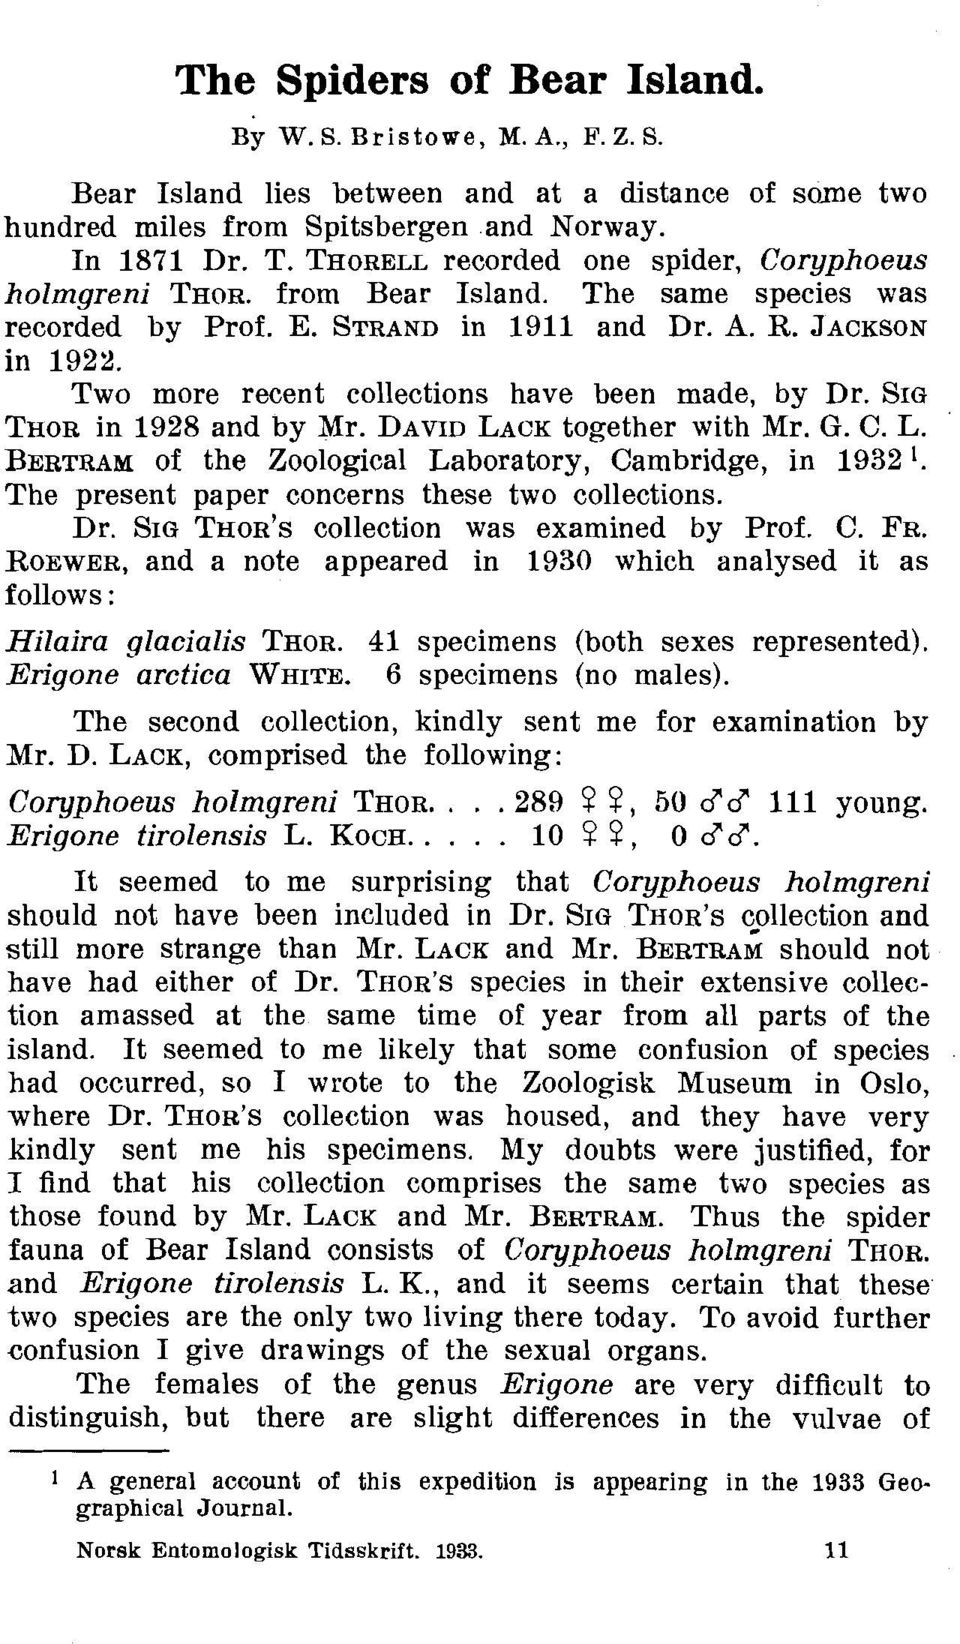 Two more recent collections have been made, by Dr. SIG THOR in 1928 and by Mr. DAVID LACK together with Mr. G. C. L. BERTRAM of the Zoological Laboratory, Cambridge, in 1932'.